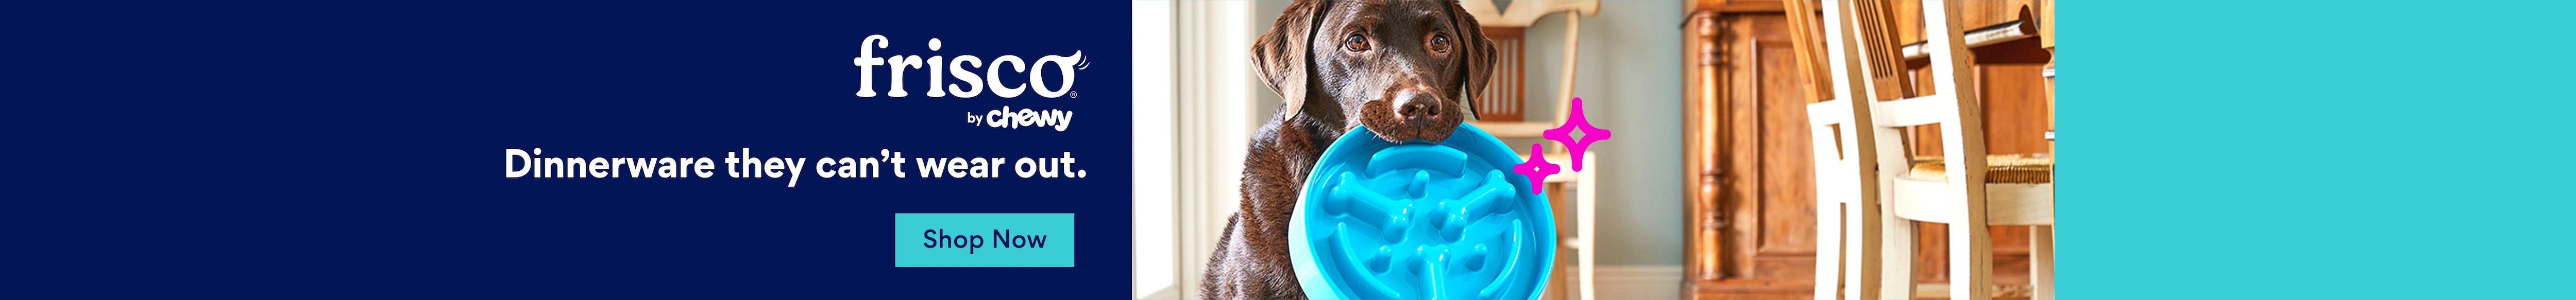 Frisco by Chewy. Dinnerware they can't wear out. Shop Now.